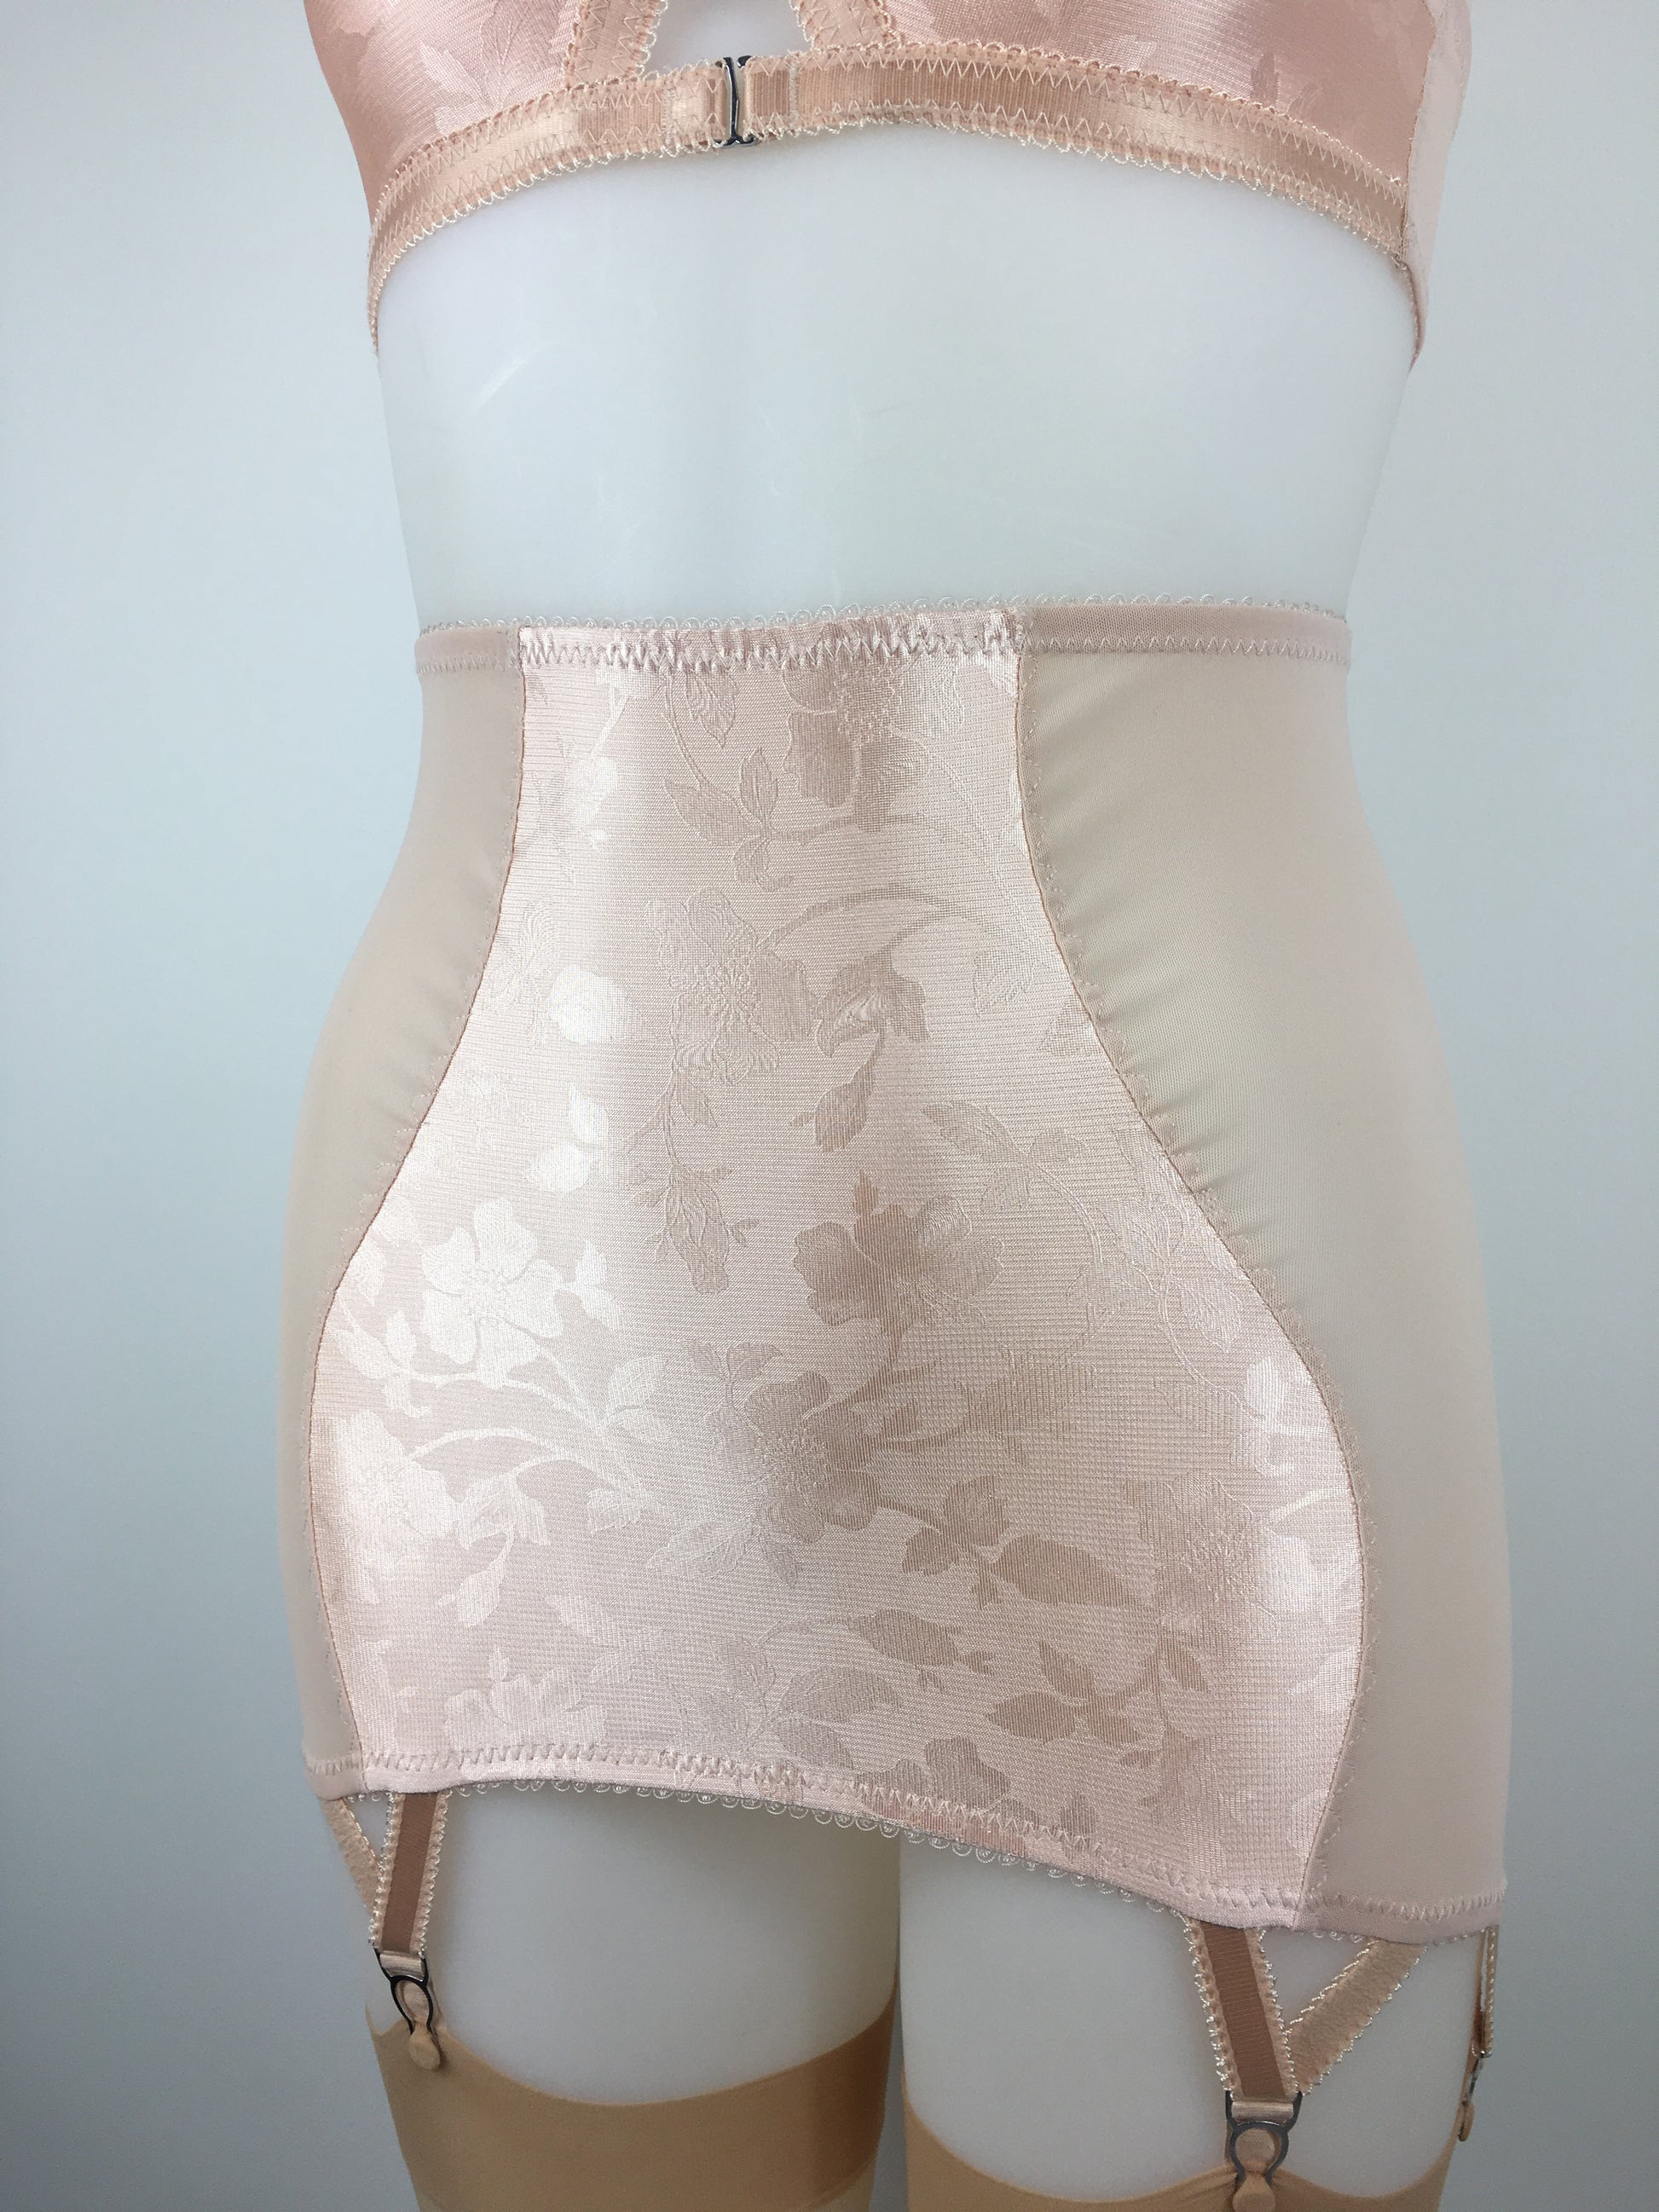 Our most authentic looking vintage inspired lingerie yet. Perfect peachy satin longline girdle with satin front and back panels. Keyhole back fastens with a steel hook after you've wiggled in. Perfect teamed with our faux vintage 1950s longline bra. The longline girdle has 6 metal suspender garter straps to keep your seamed stockings in place. Reproduction nude vintage lingerie made in the uk